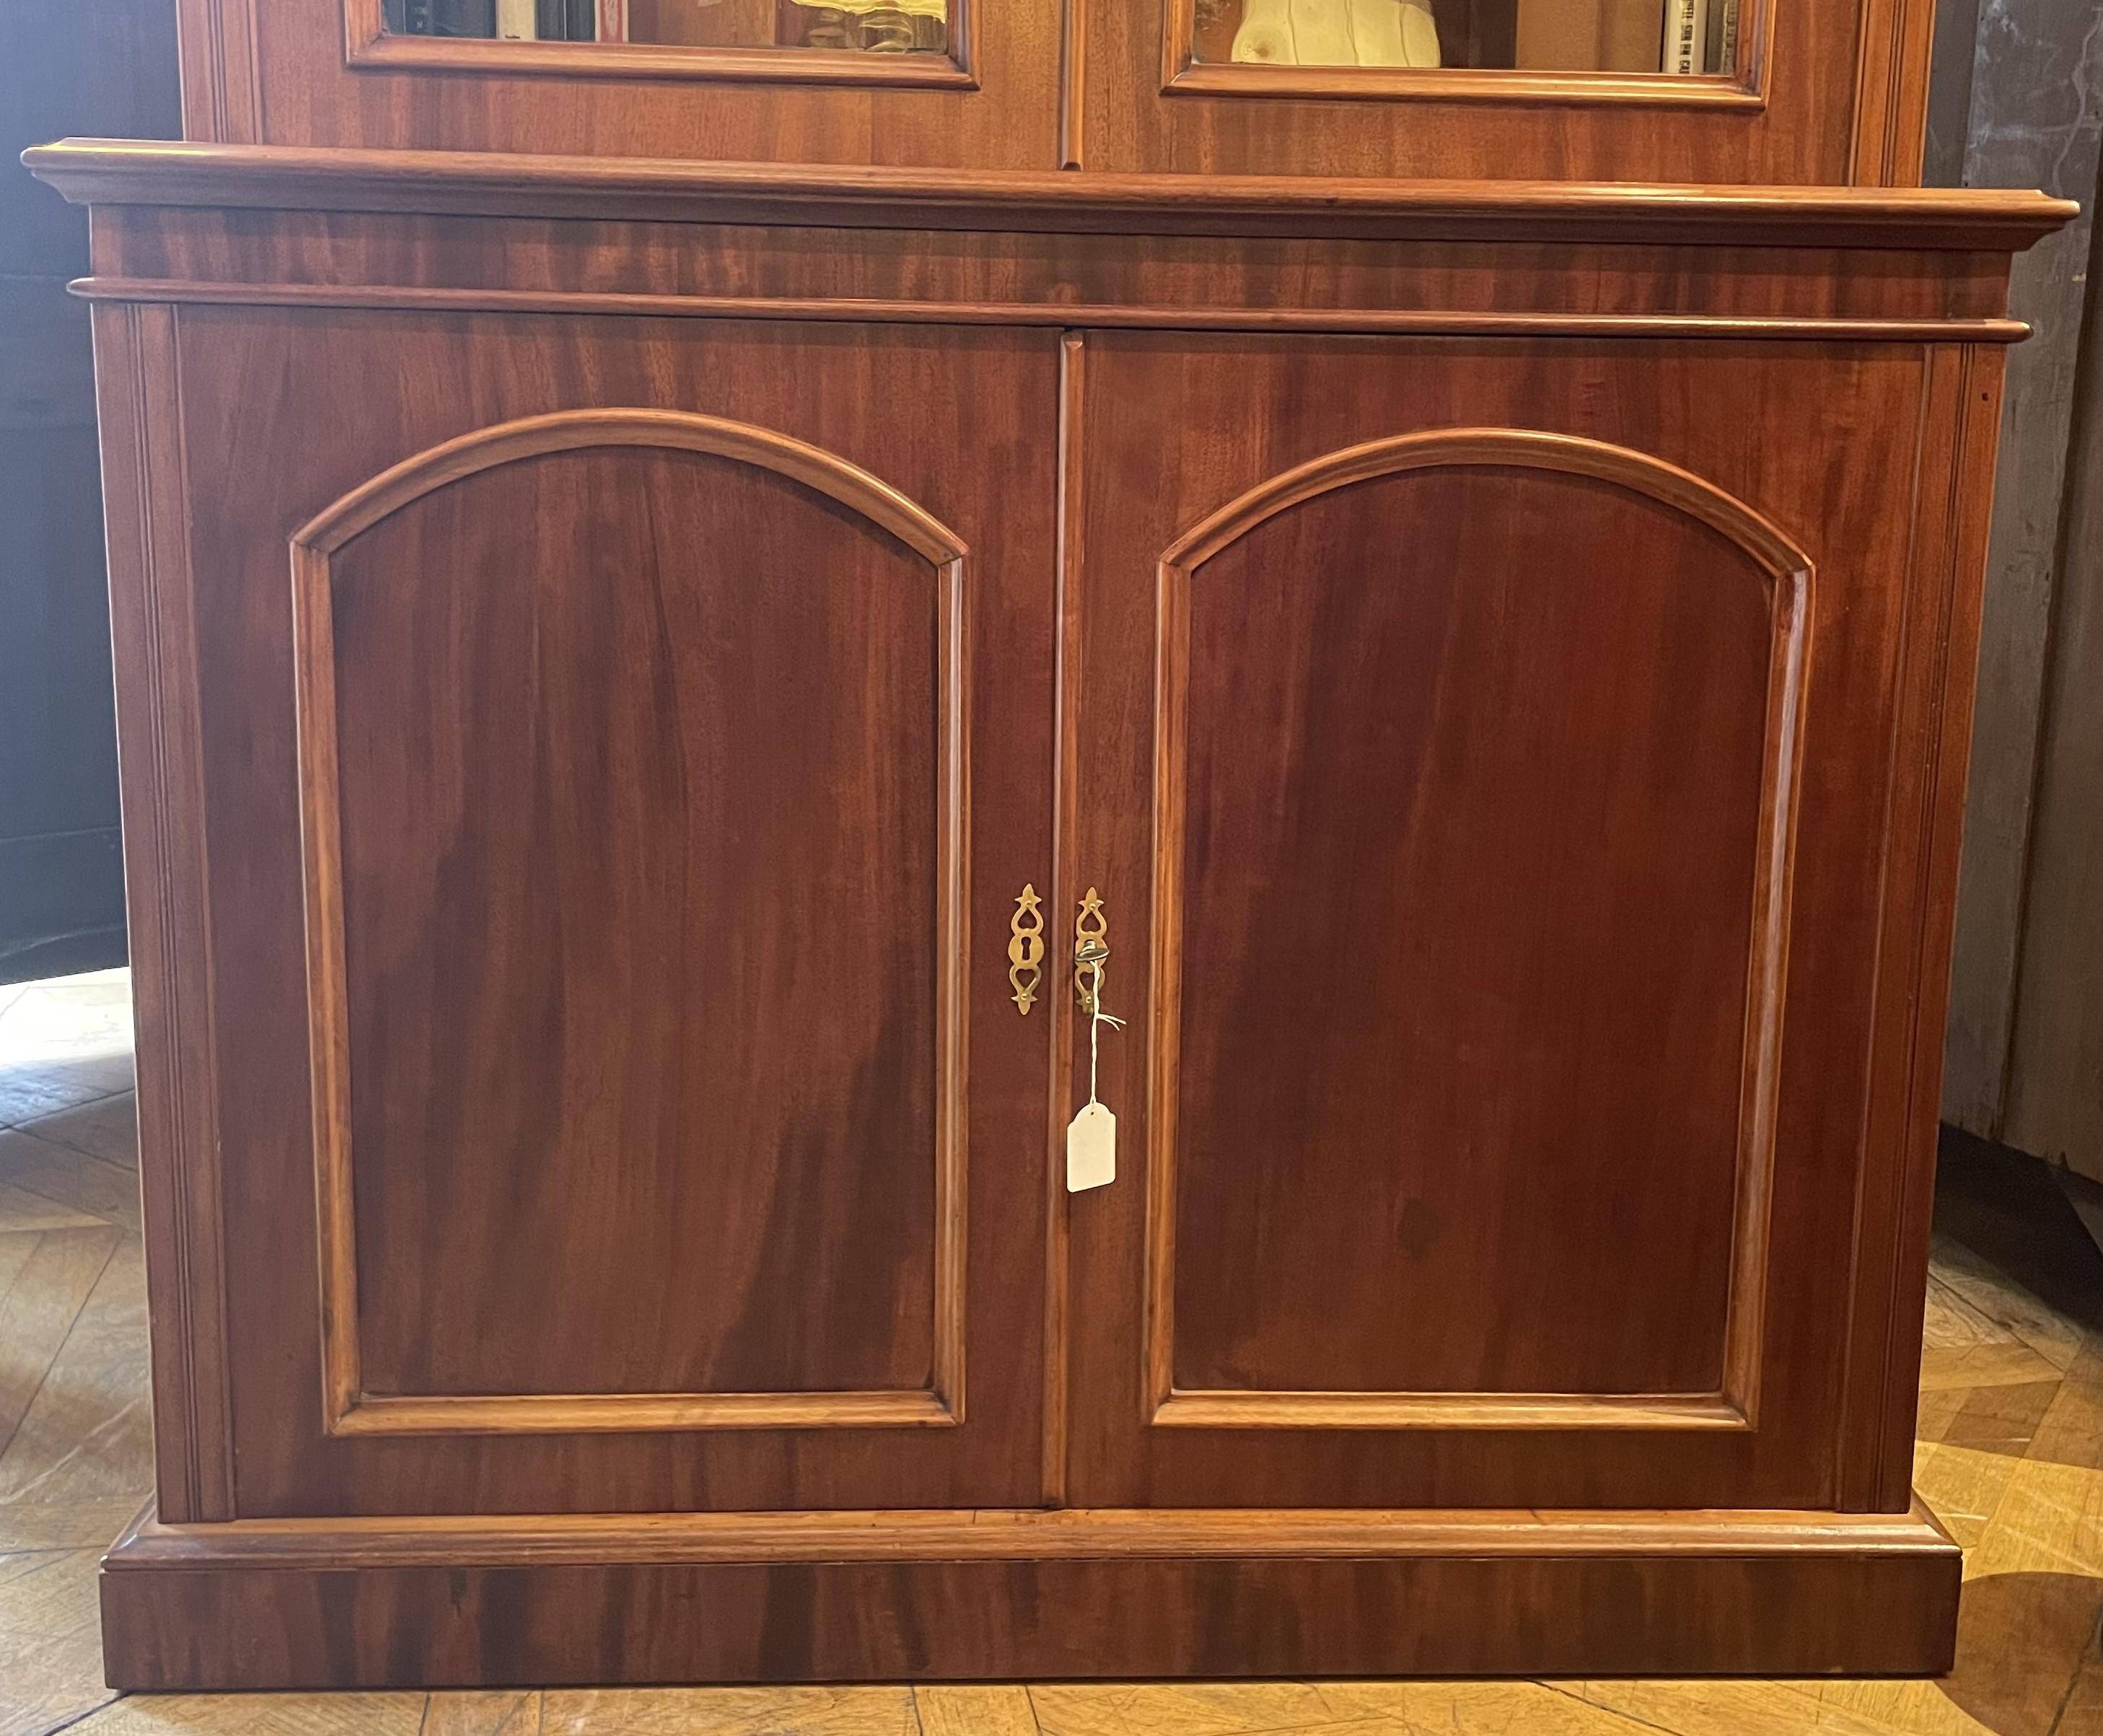 Elegant English bookcase in mahogany from the 19th century with glazed windows

Very beautiful large model which has two glass doors on the upper part and two doors at the bottom

Very good quality bookcase which has its original